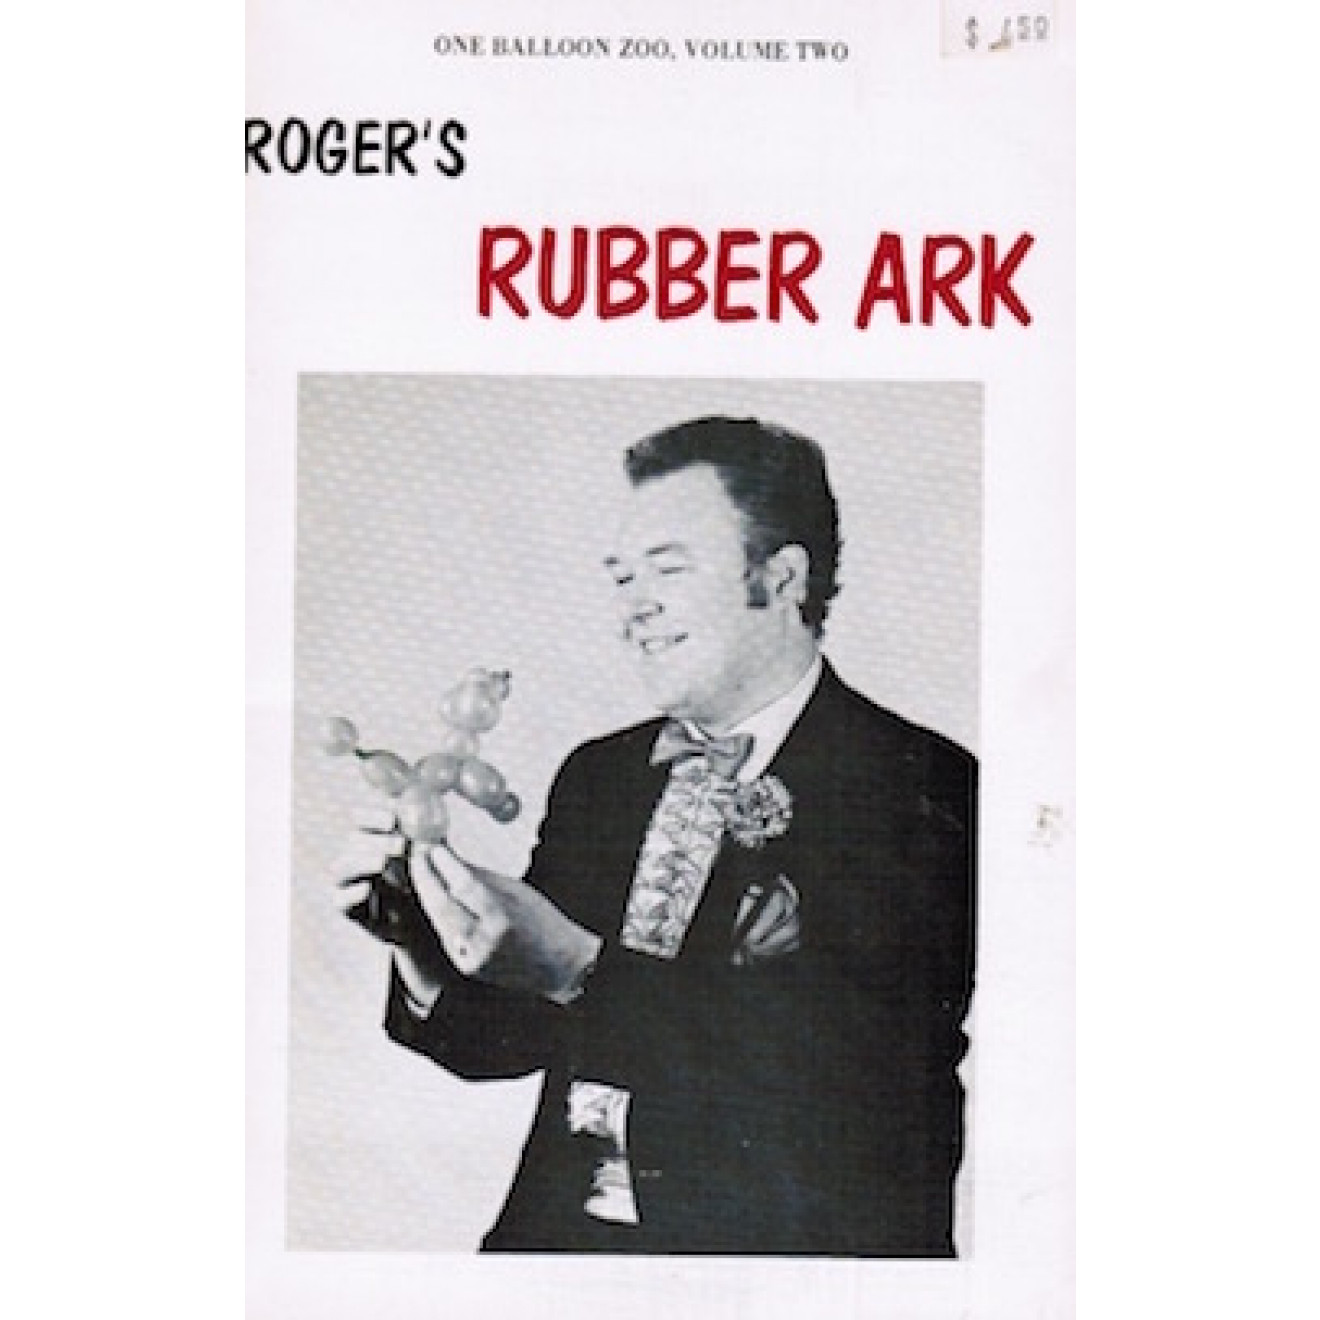 One Balloon Zoo Vol.2 - Roger's Rubber Ark